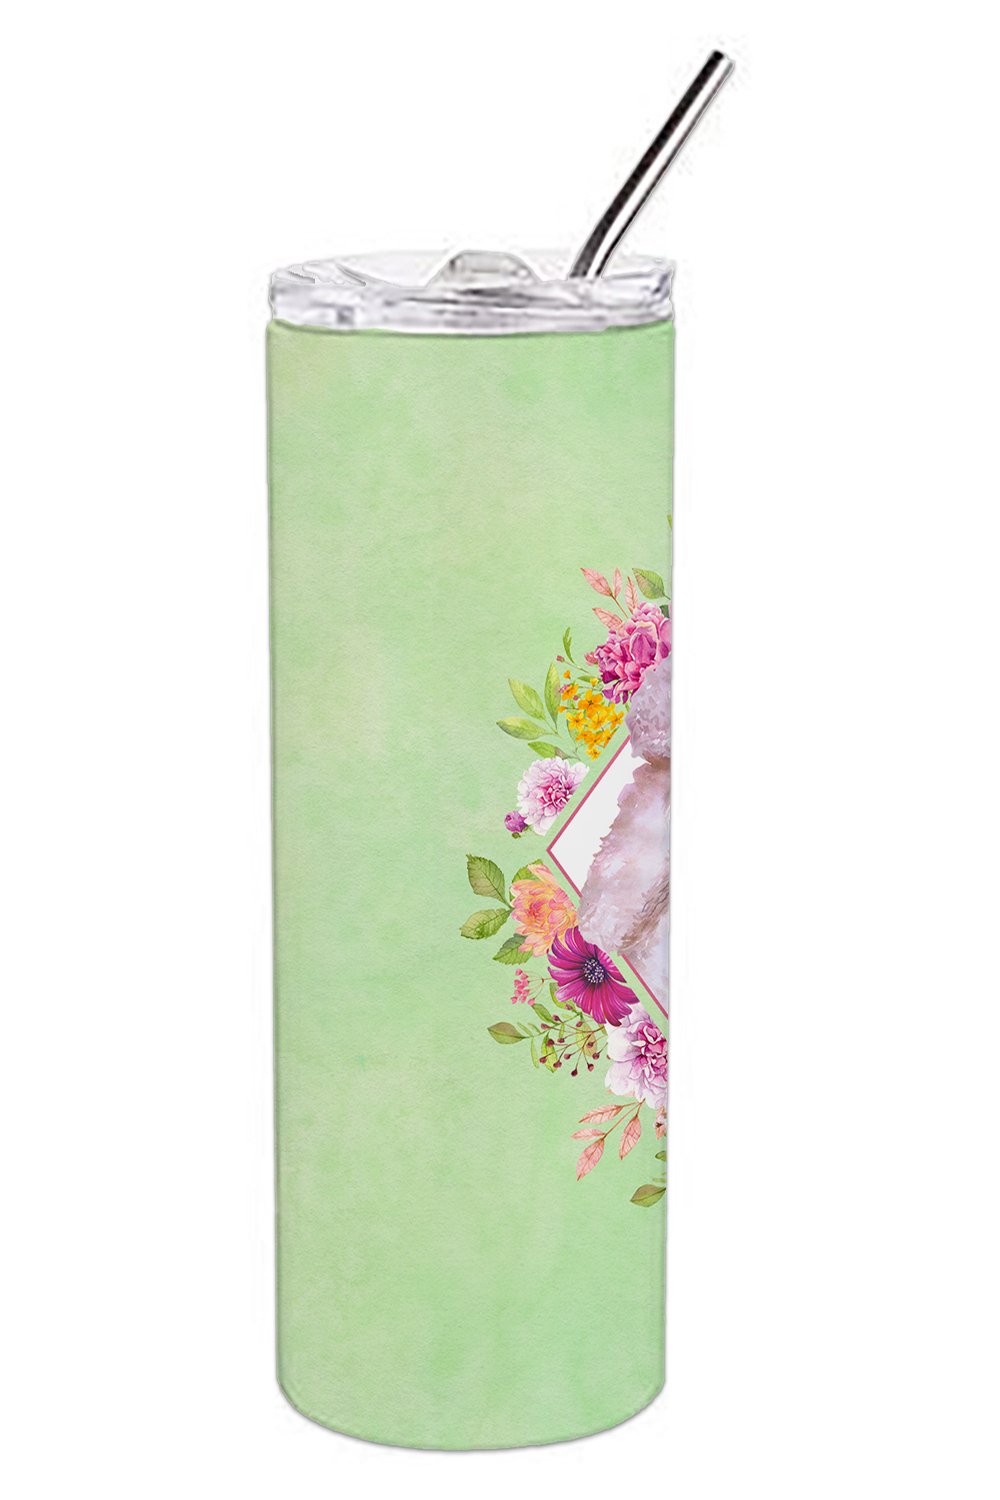 Standard White Poodle Green Flowers Double Walled Stainless Steel 20 oz Skinny Tumbler CK4331TBL20 by Caroline's Treasures